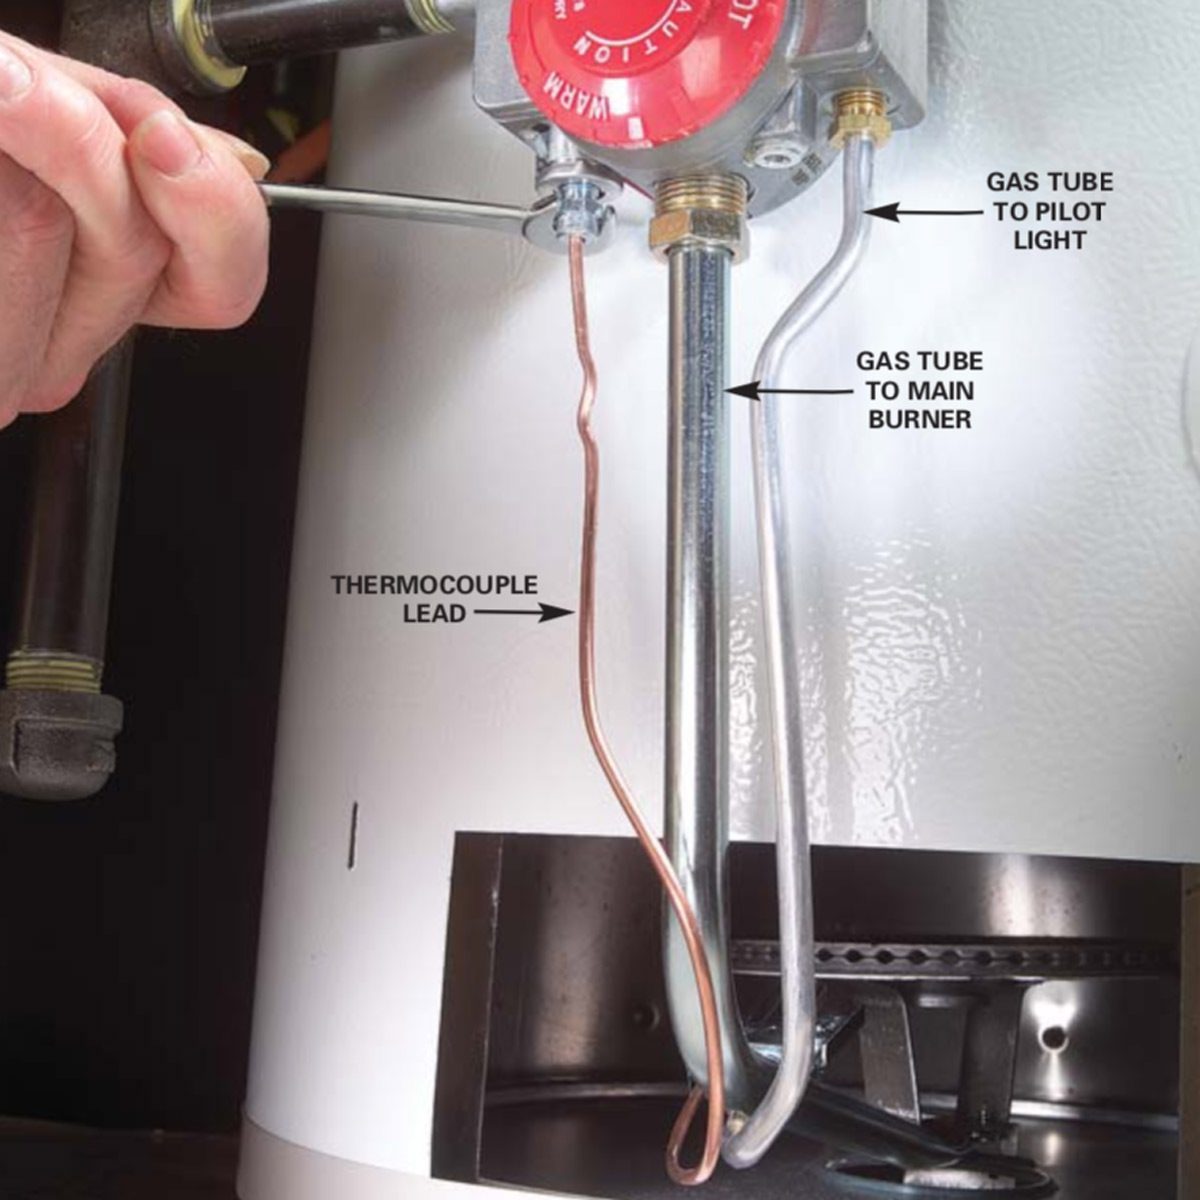 How To Replace A Water Heater Thermocouple Family Handyman